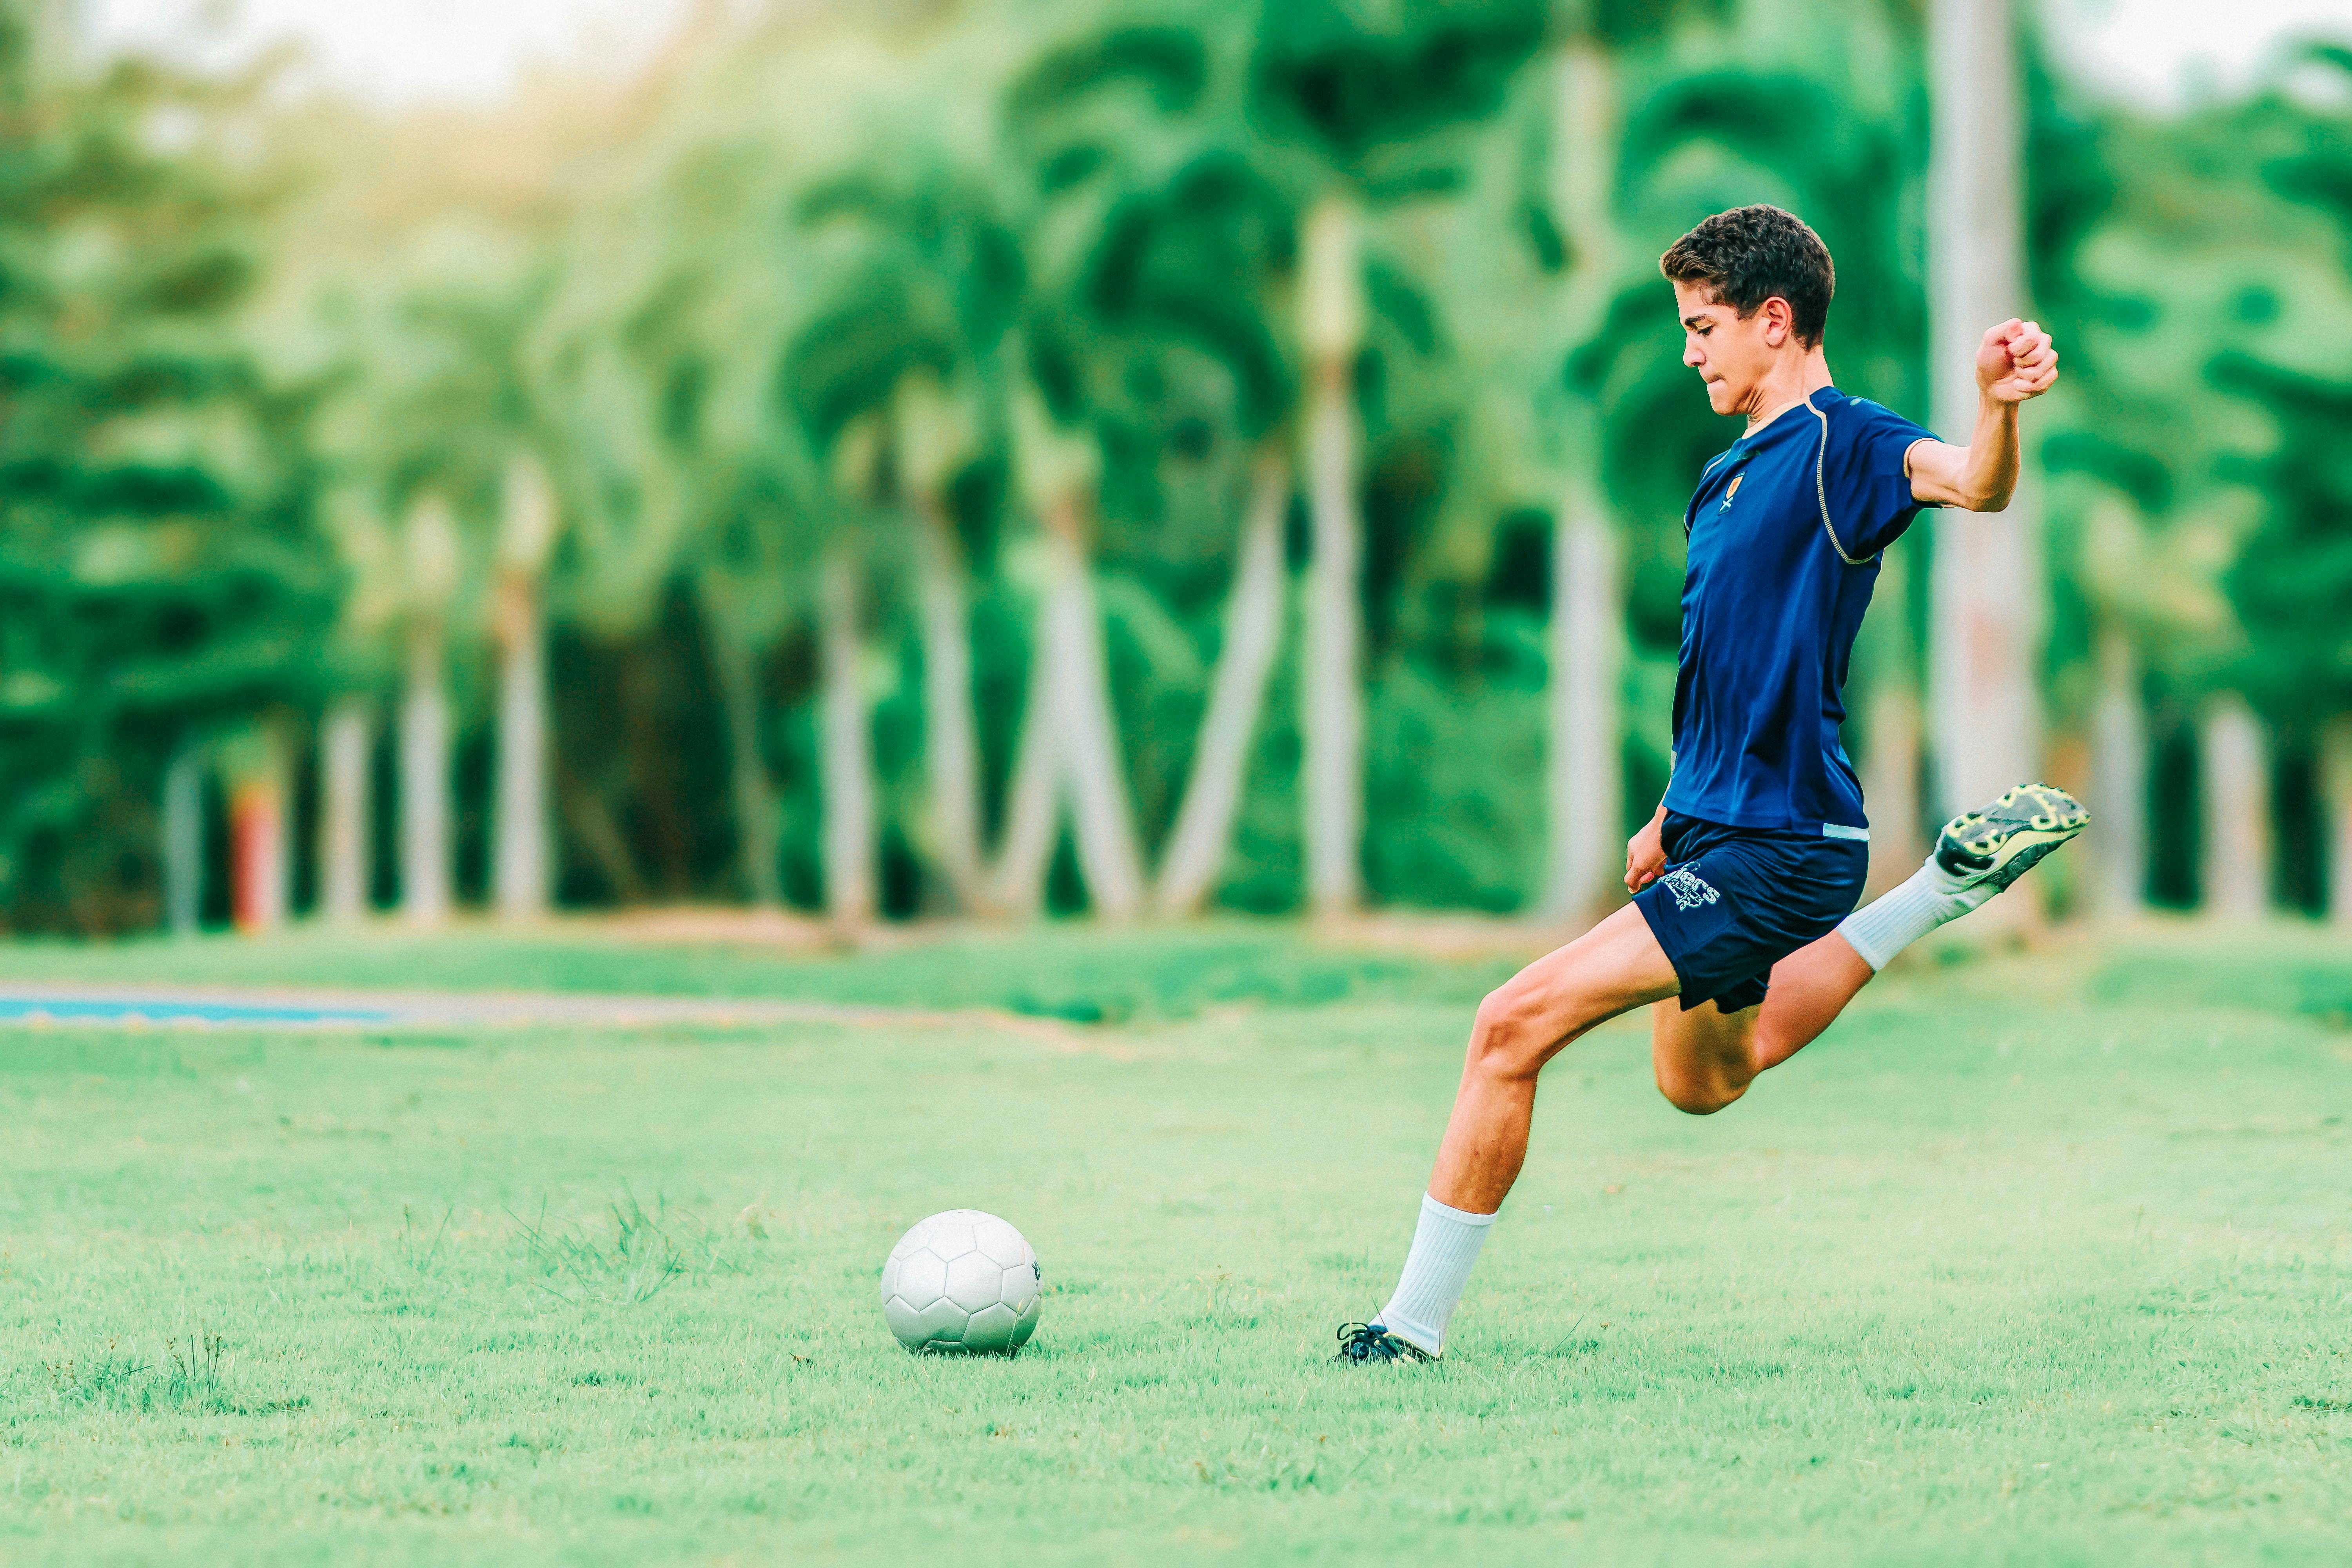 How to Head a Soccer Ball - A Soccer Player's Complete Guide To The Game